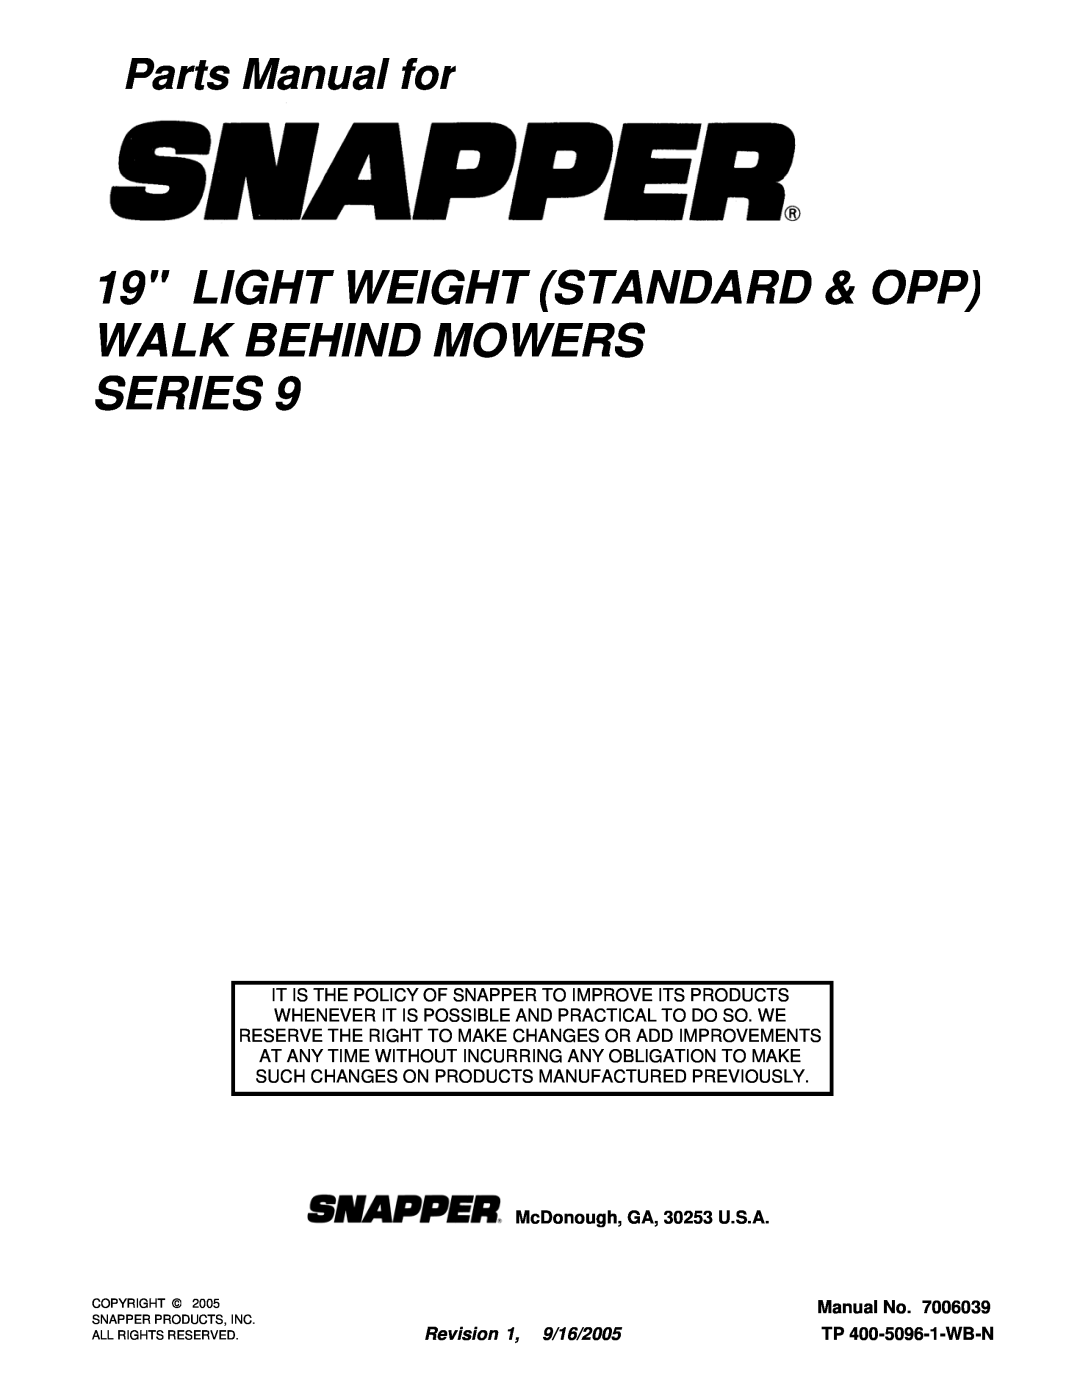 Snapper DLW409R-2 TP 400-5096-1-WB-N, Light Weight Standard & Opp Walk Behind Mowers Series, Parts Manual for, Manual No 